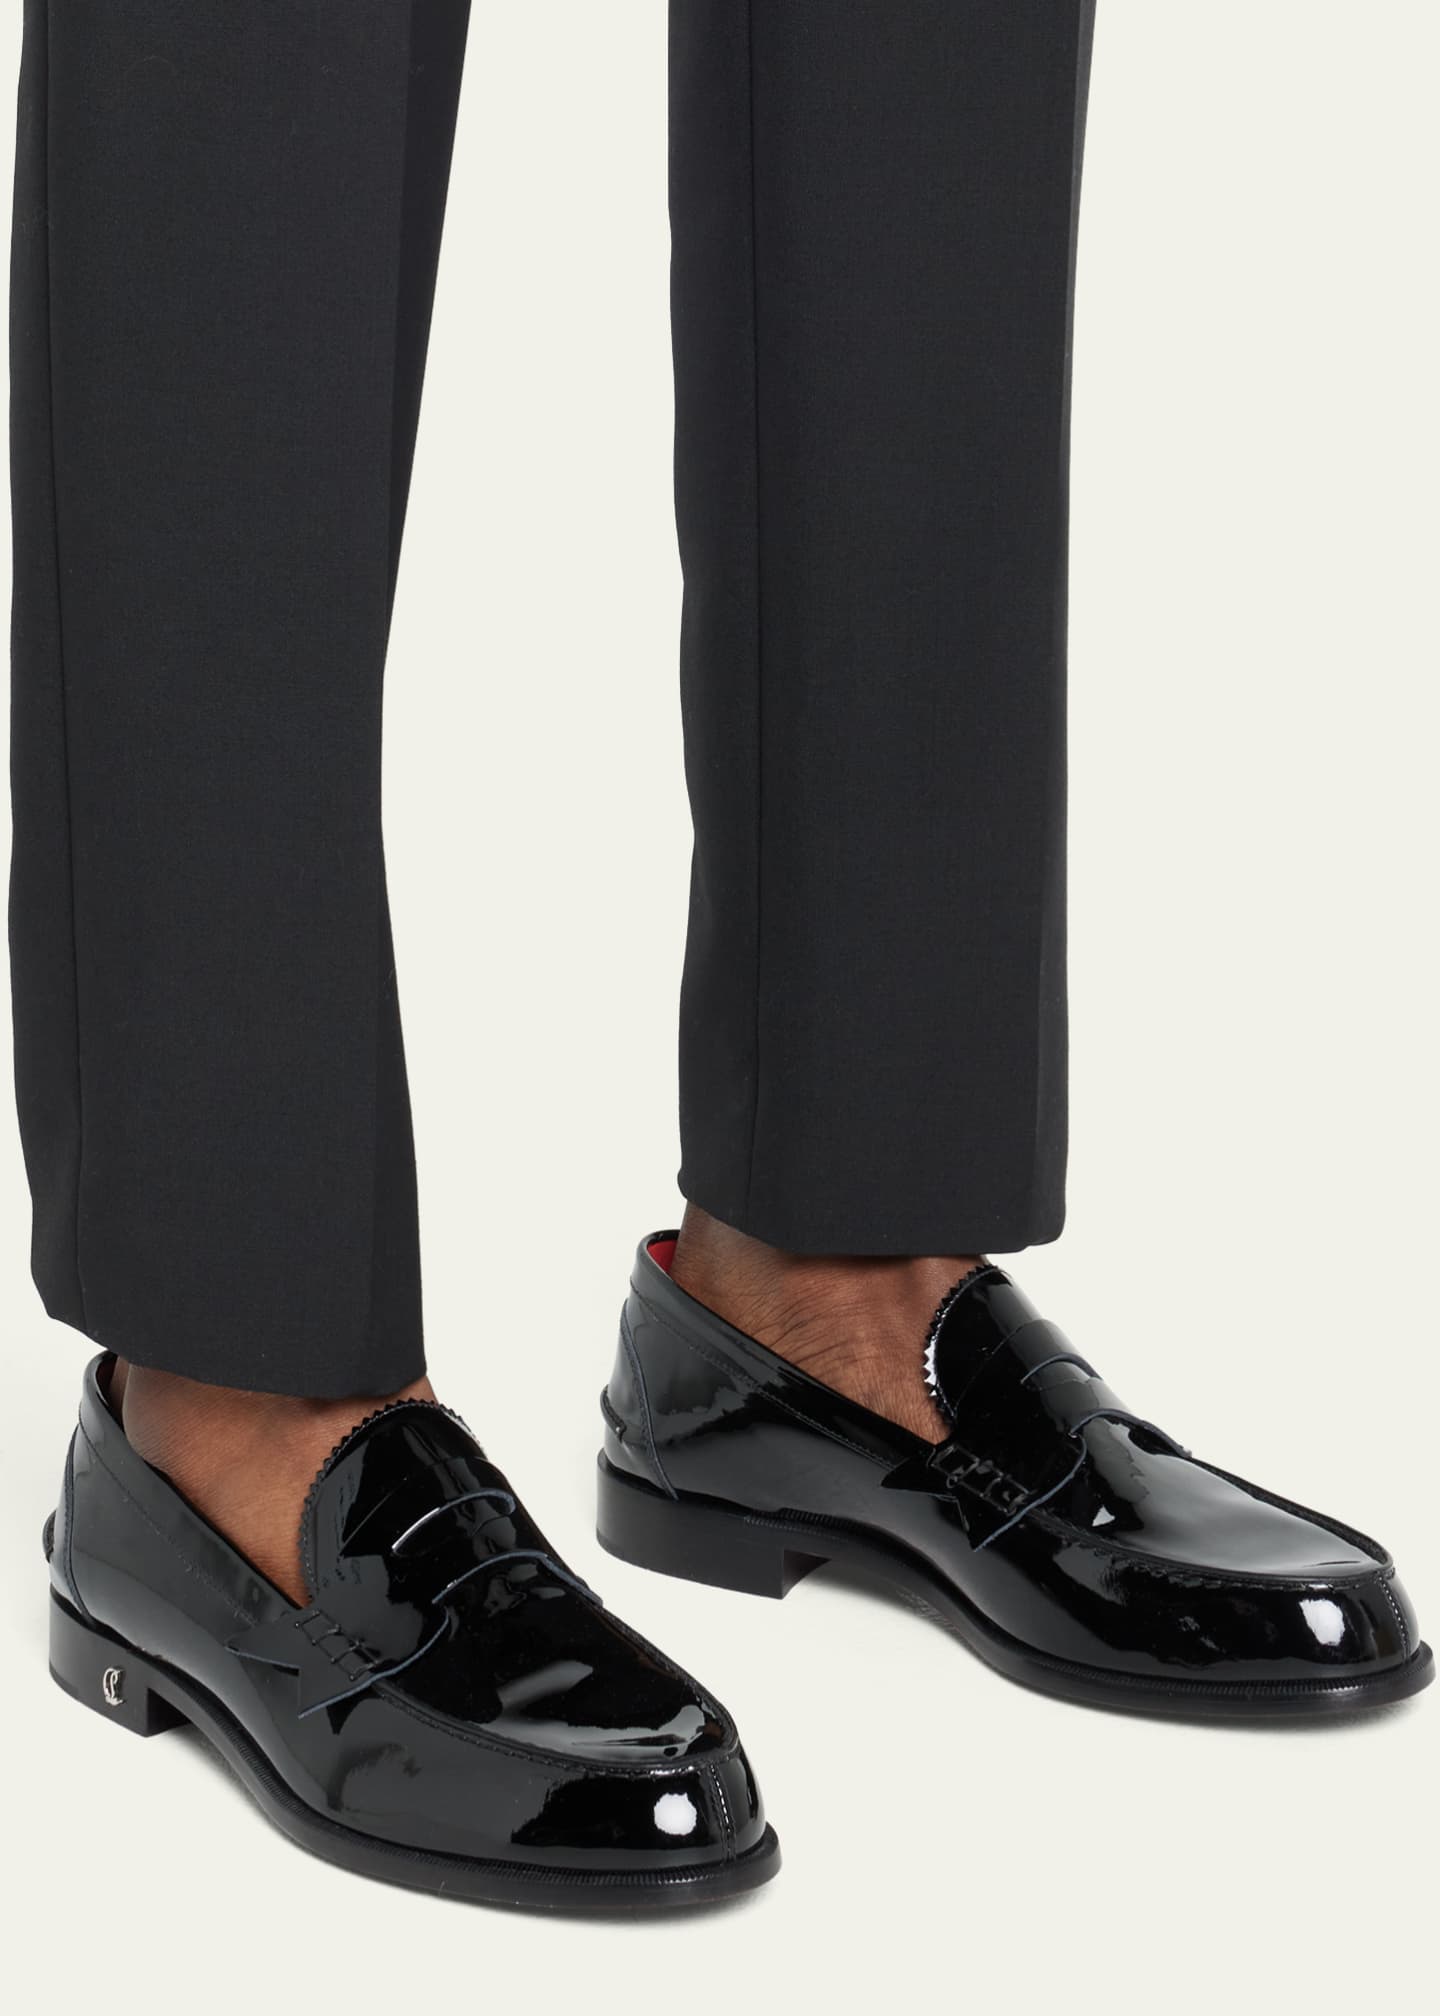 Se tilbage Kloster lastbil Christian Louboutin Men's No Penny Patent Leather Penny Loafers - Bergdorf  Goodman